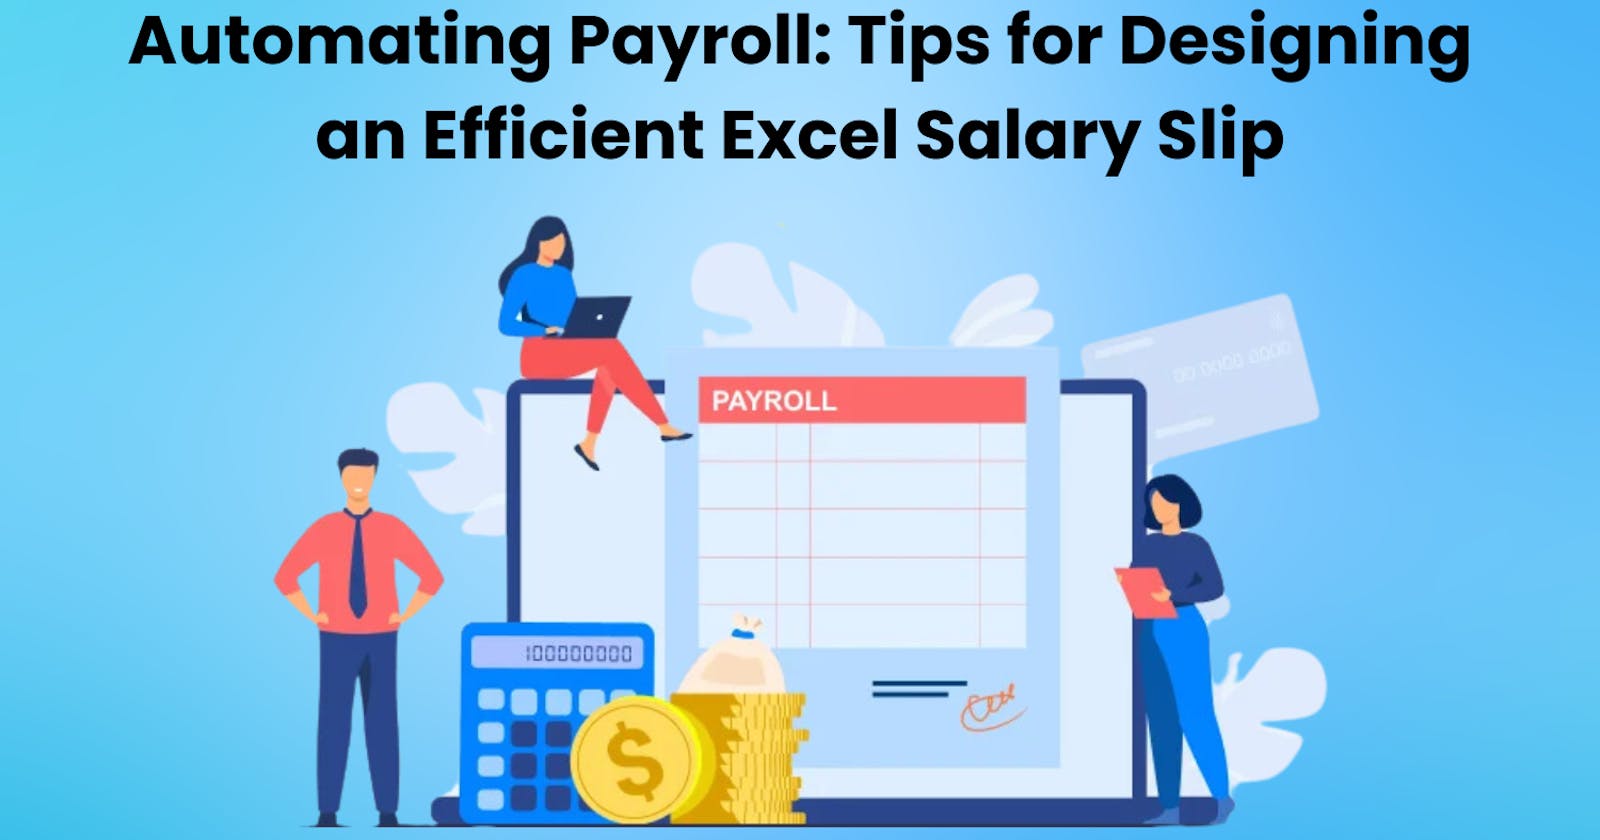 Automating Payroll: Tips for Designing an Efficient Excel Salary Slip